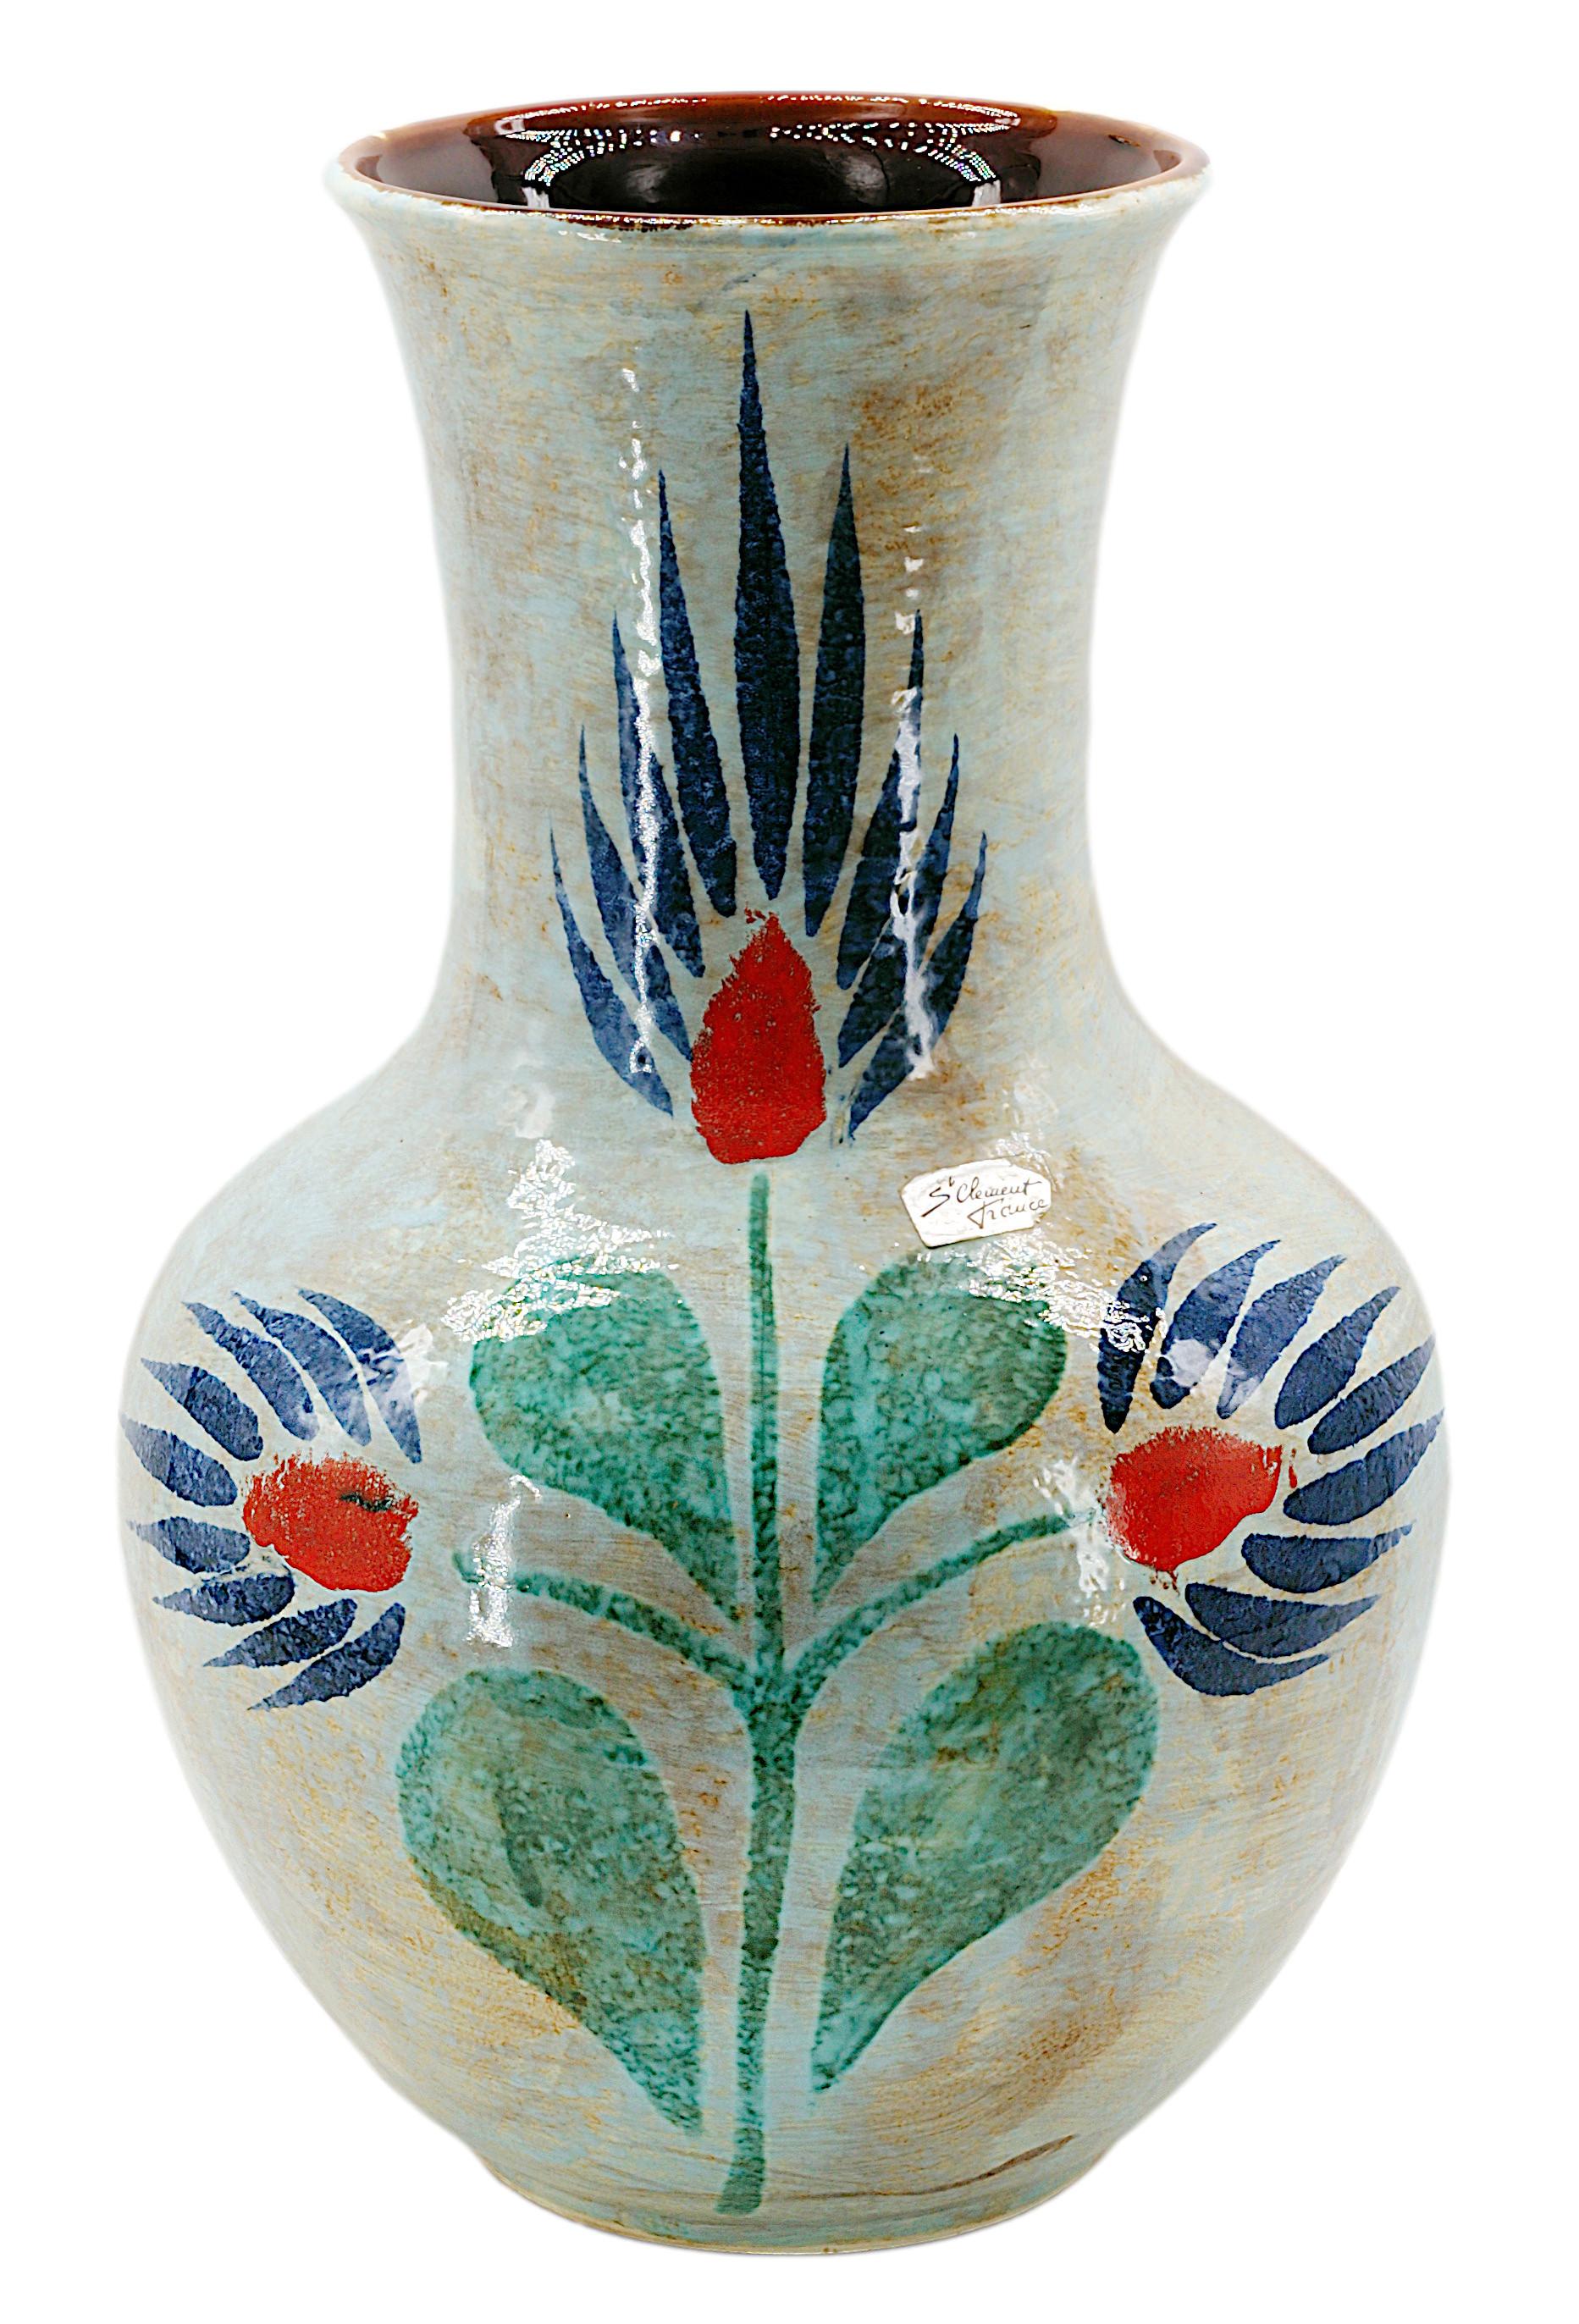 Huge stoneware vase at Saint-Clement's, France, 1950s. Huge, spectacular and very rare vase in this size showing a stylized painted and partially enameled floral pattern. Brown inside. Height : 20